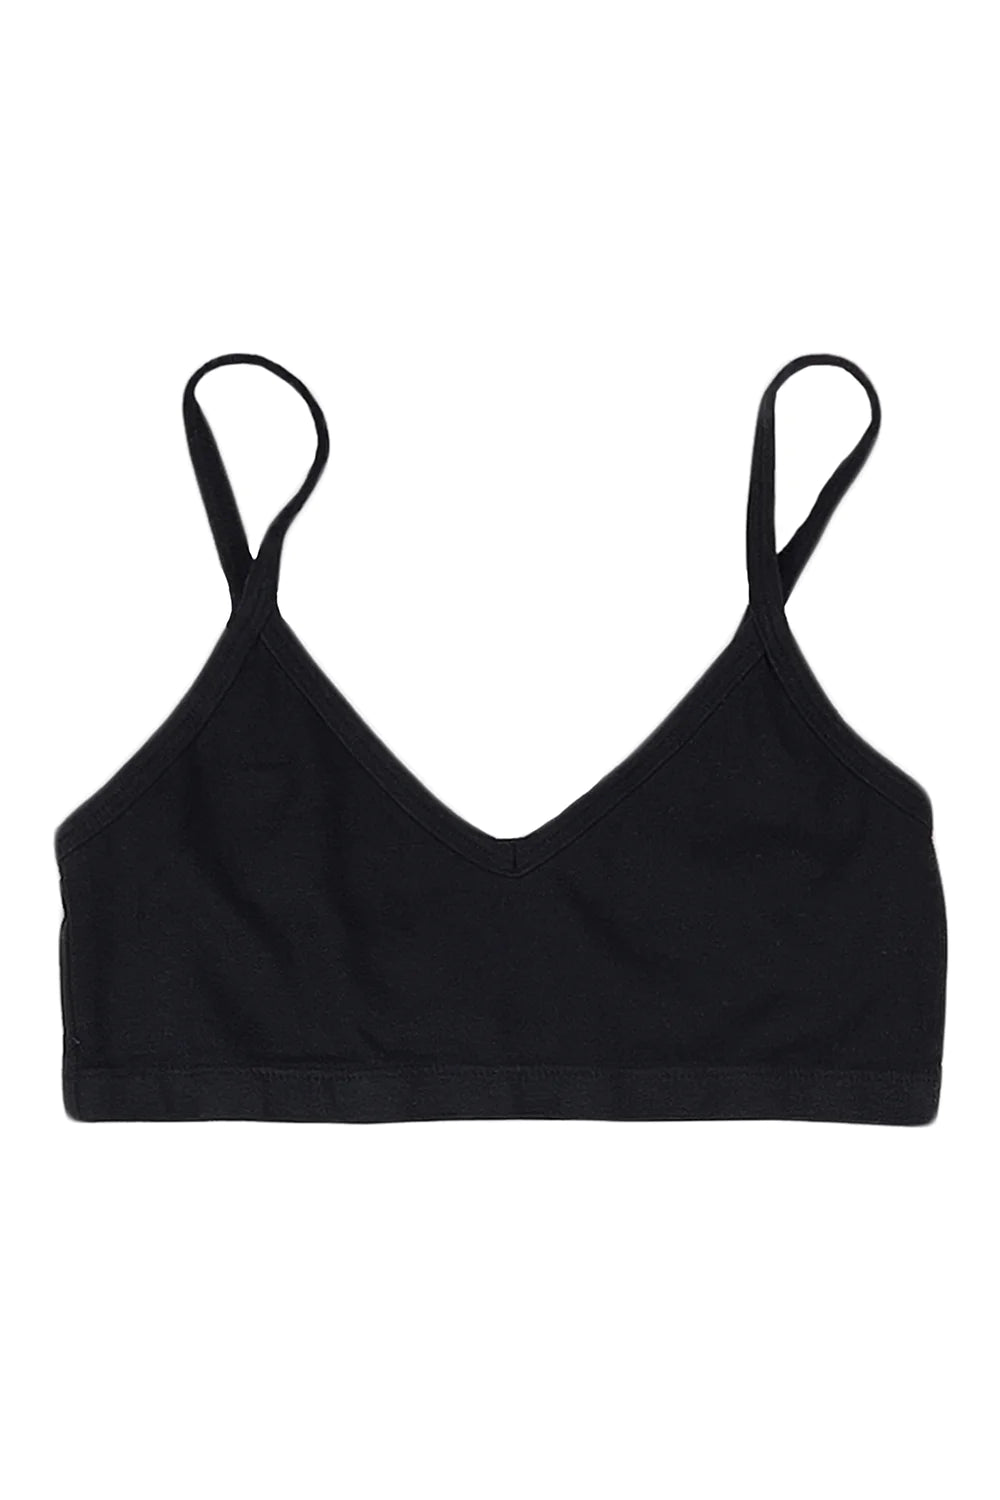 🖤BENCH 🖤95 % Cotton Sports Bra in black and white. Size large. Brand new .